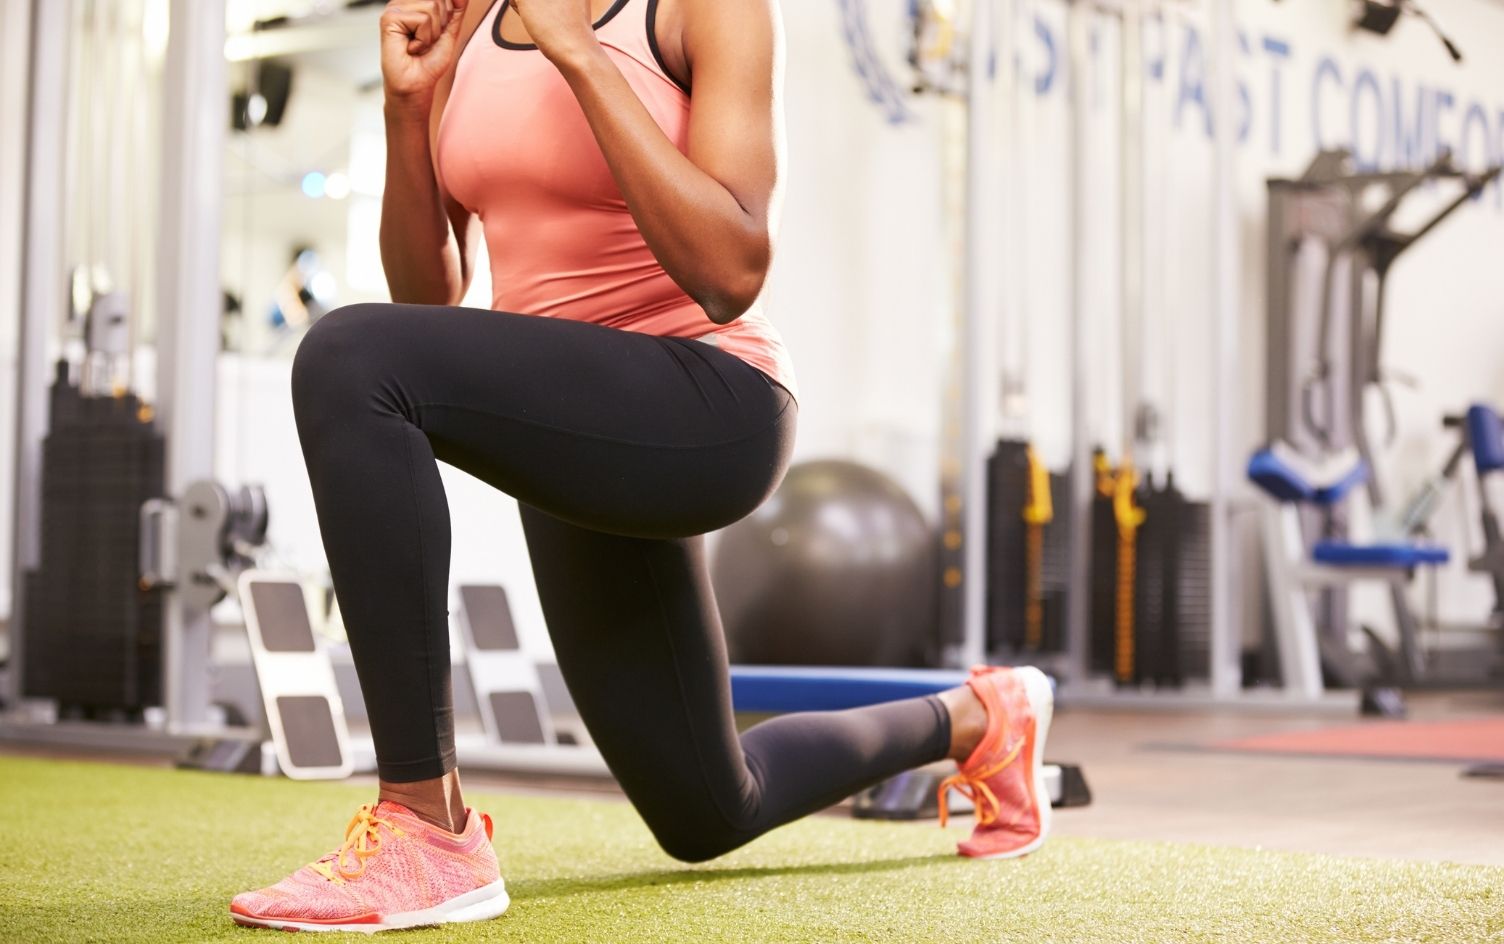 types of lunges: 6 Types of Lunges You Can Do without Weights